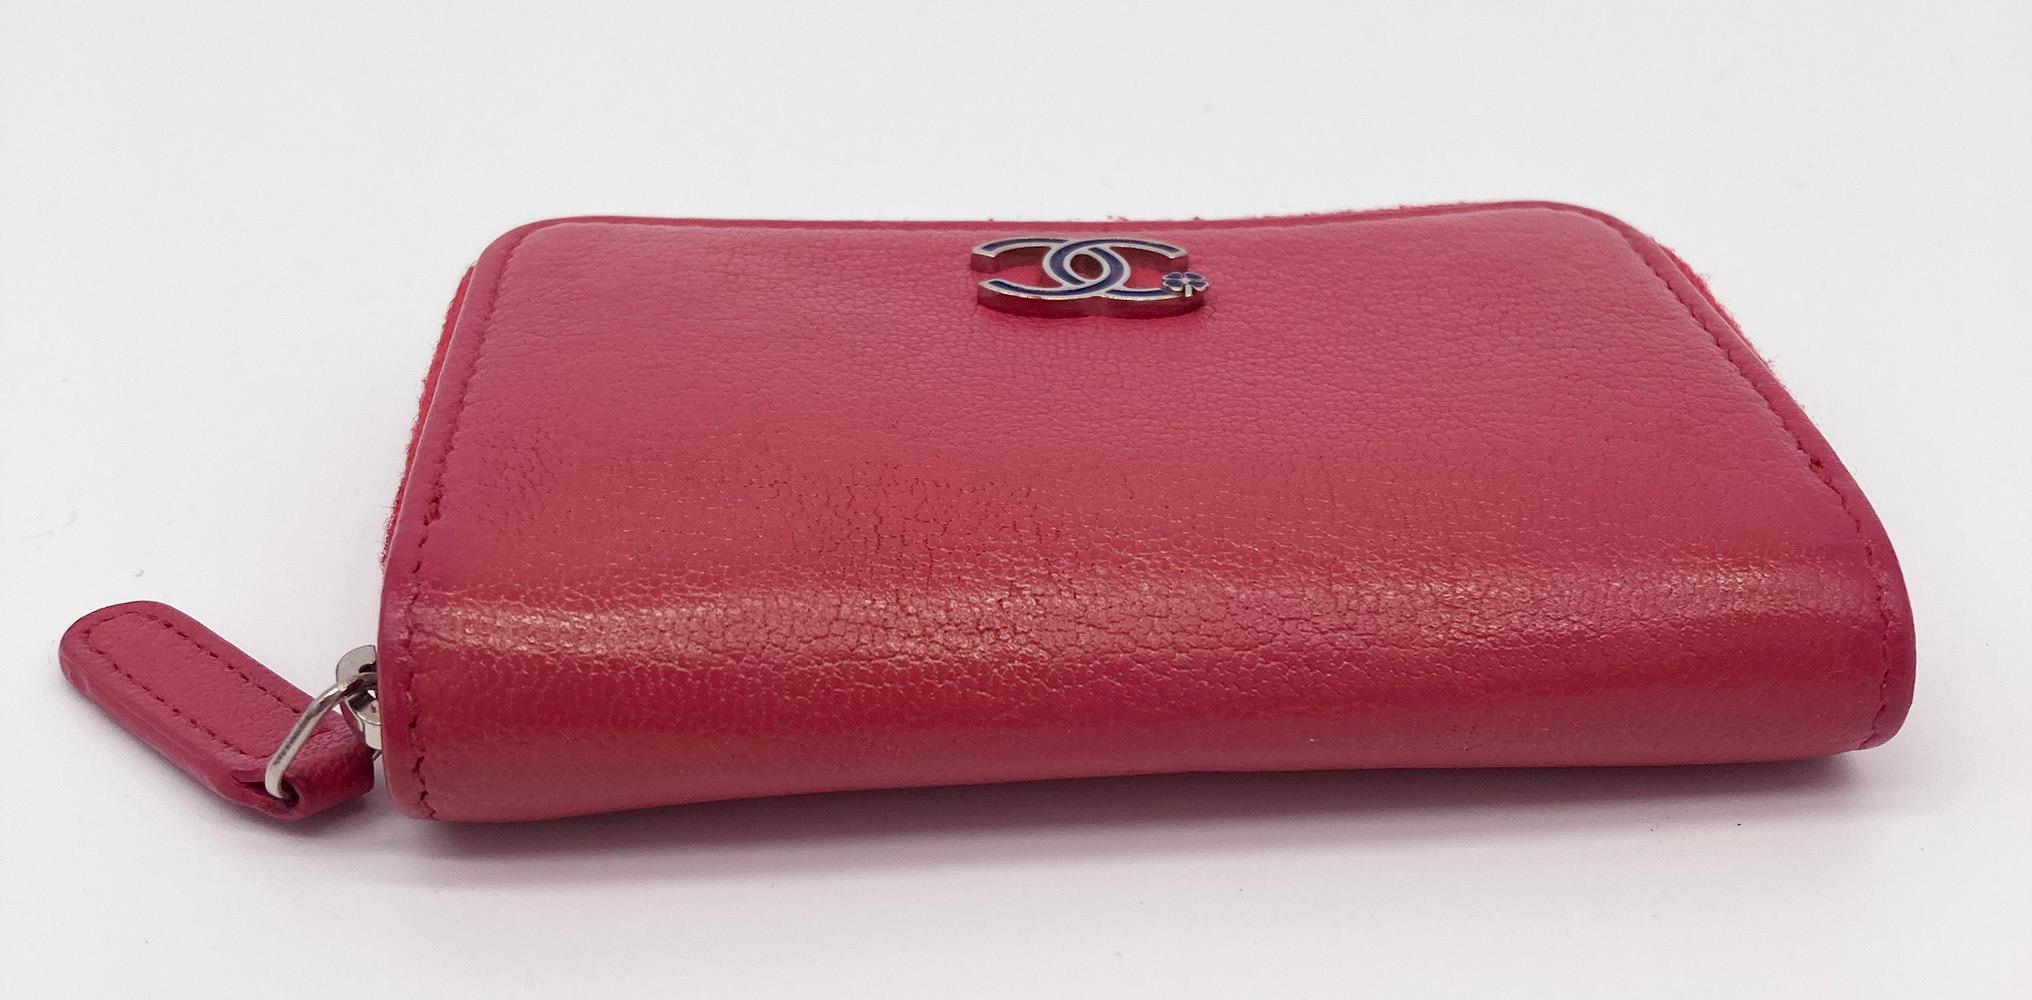 Chanel Pink Zip Wallet In Excellent Condition For Sale In Philadelphia, PA